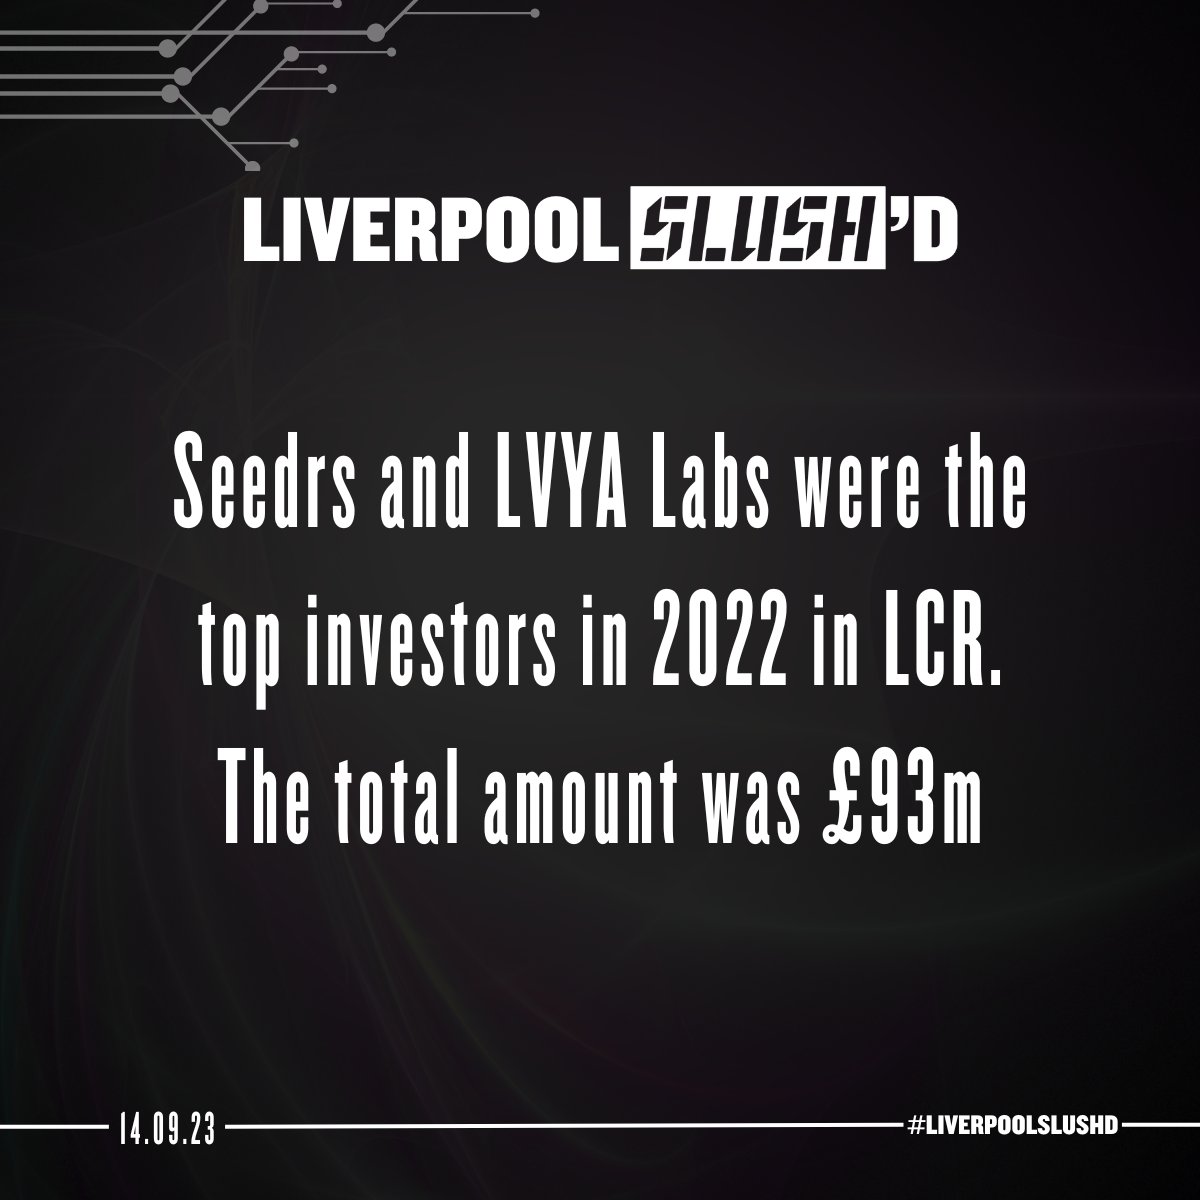 Liverpool is not only famous for its rich history and vibrant culture, but it's also a thriving hub for business innovation🚀 Here are some Liverpool-focused facts that showcase the city's impressive achievements! #LiverpoolSlushD #LiverpoolBusiness